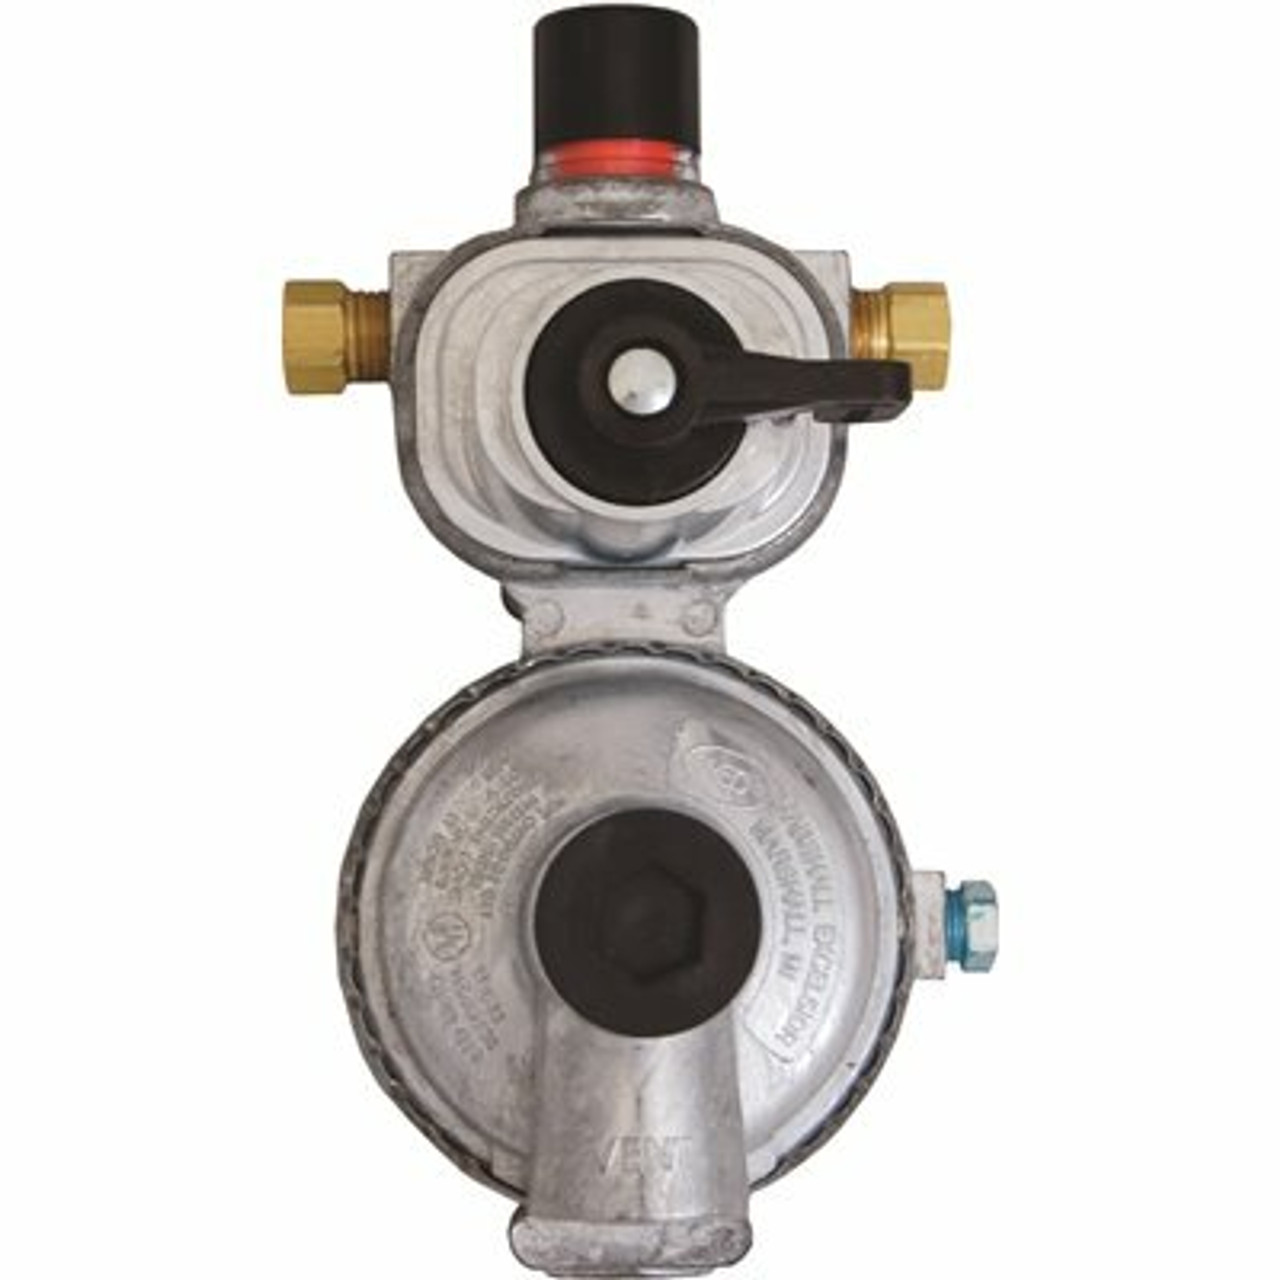 Excela-Flo Mec Automatic Changeover Regulator 2-Stage 1/4 In. Inverted Flare X 3/8 In. Fnpt